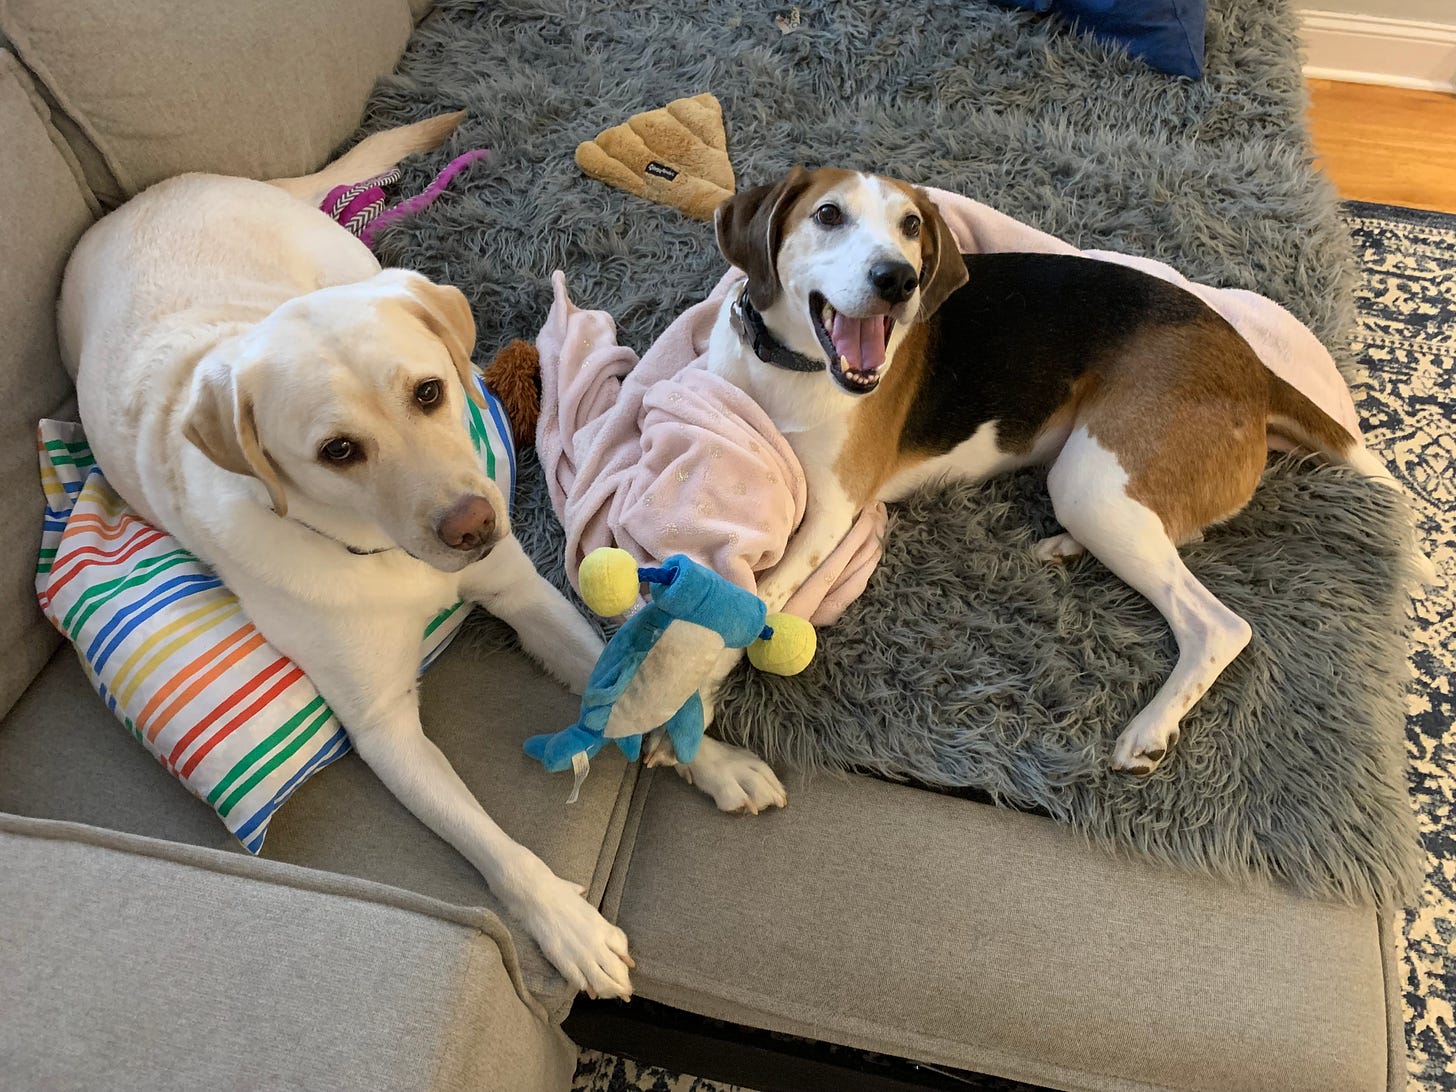 A yellow Labrador retriever and a white, brown and black American Foxhound lay on a gray couch together surrounded by pillows dog toys and blankets. The Foxhound looks like he's smiling with his mouth open. 